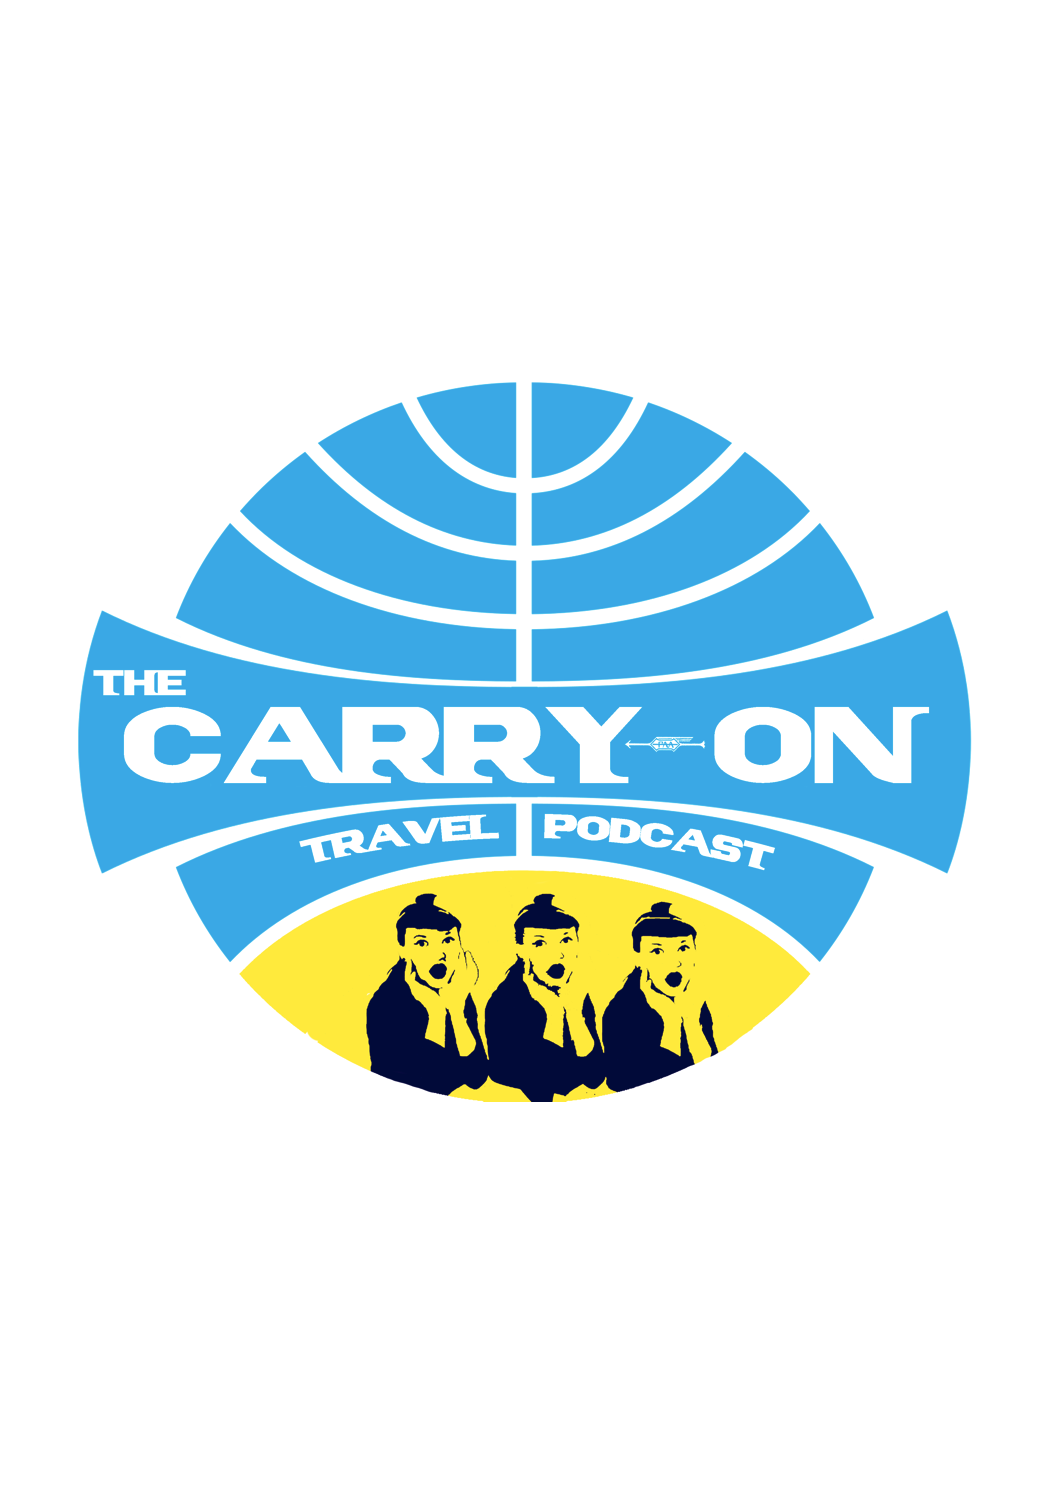 Good NEWS:The Carry On travel podcast brings relief to listeners (and a chance to win)